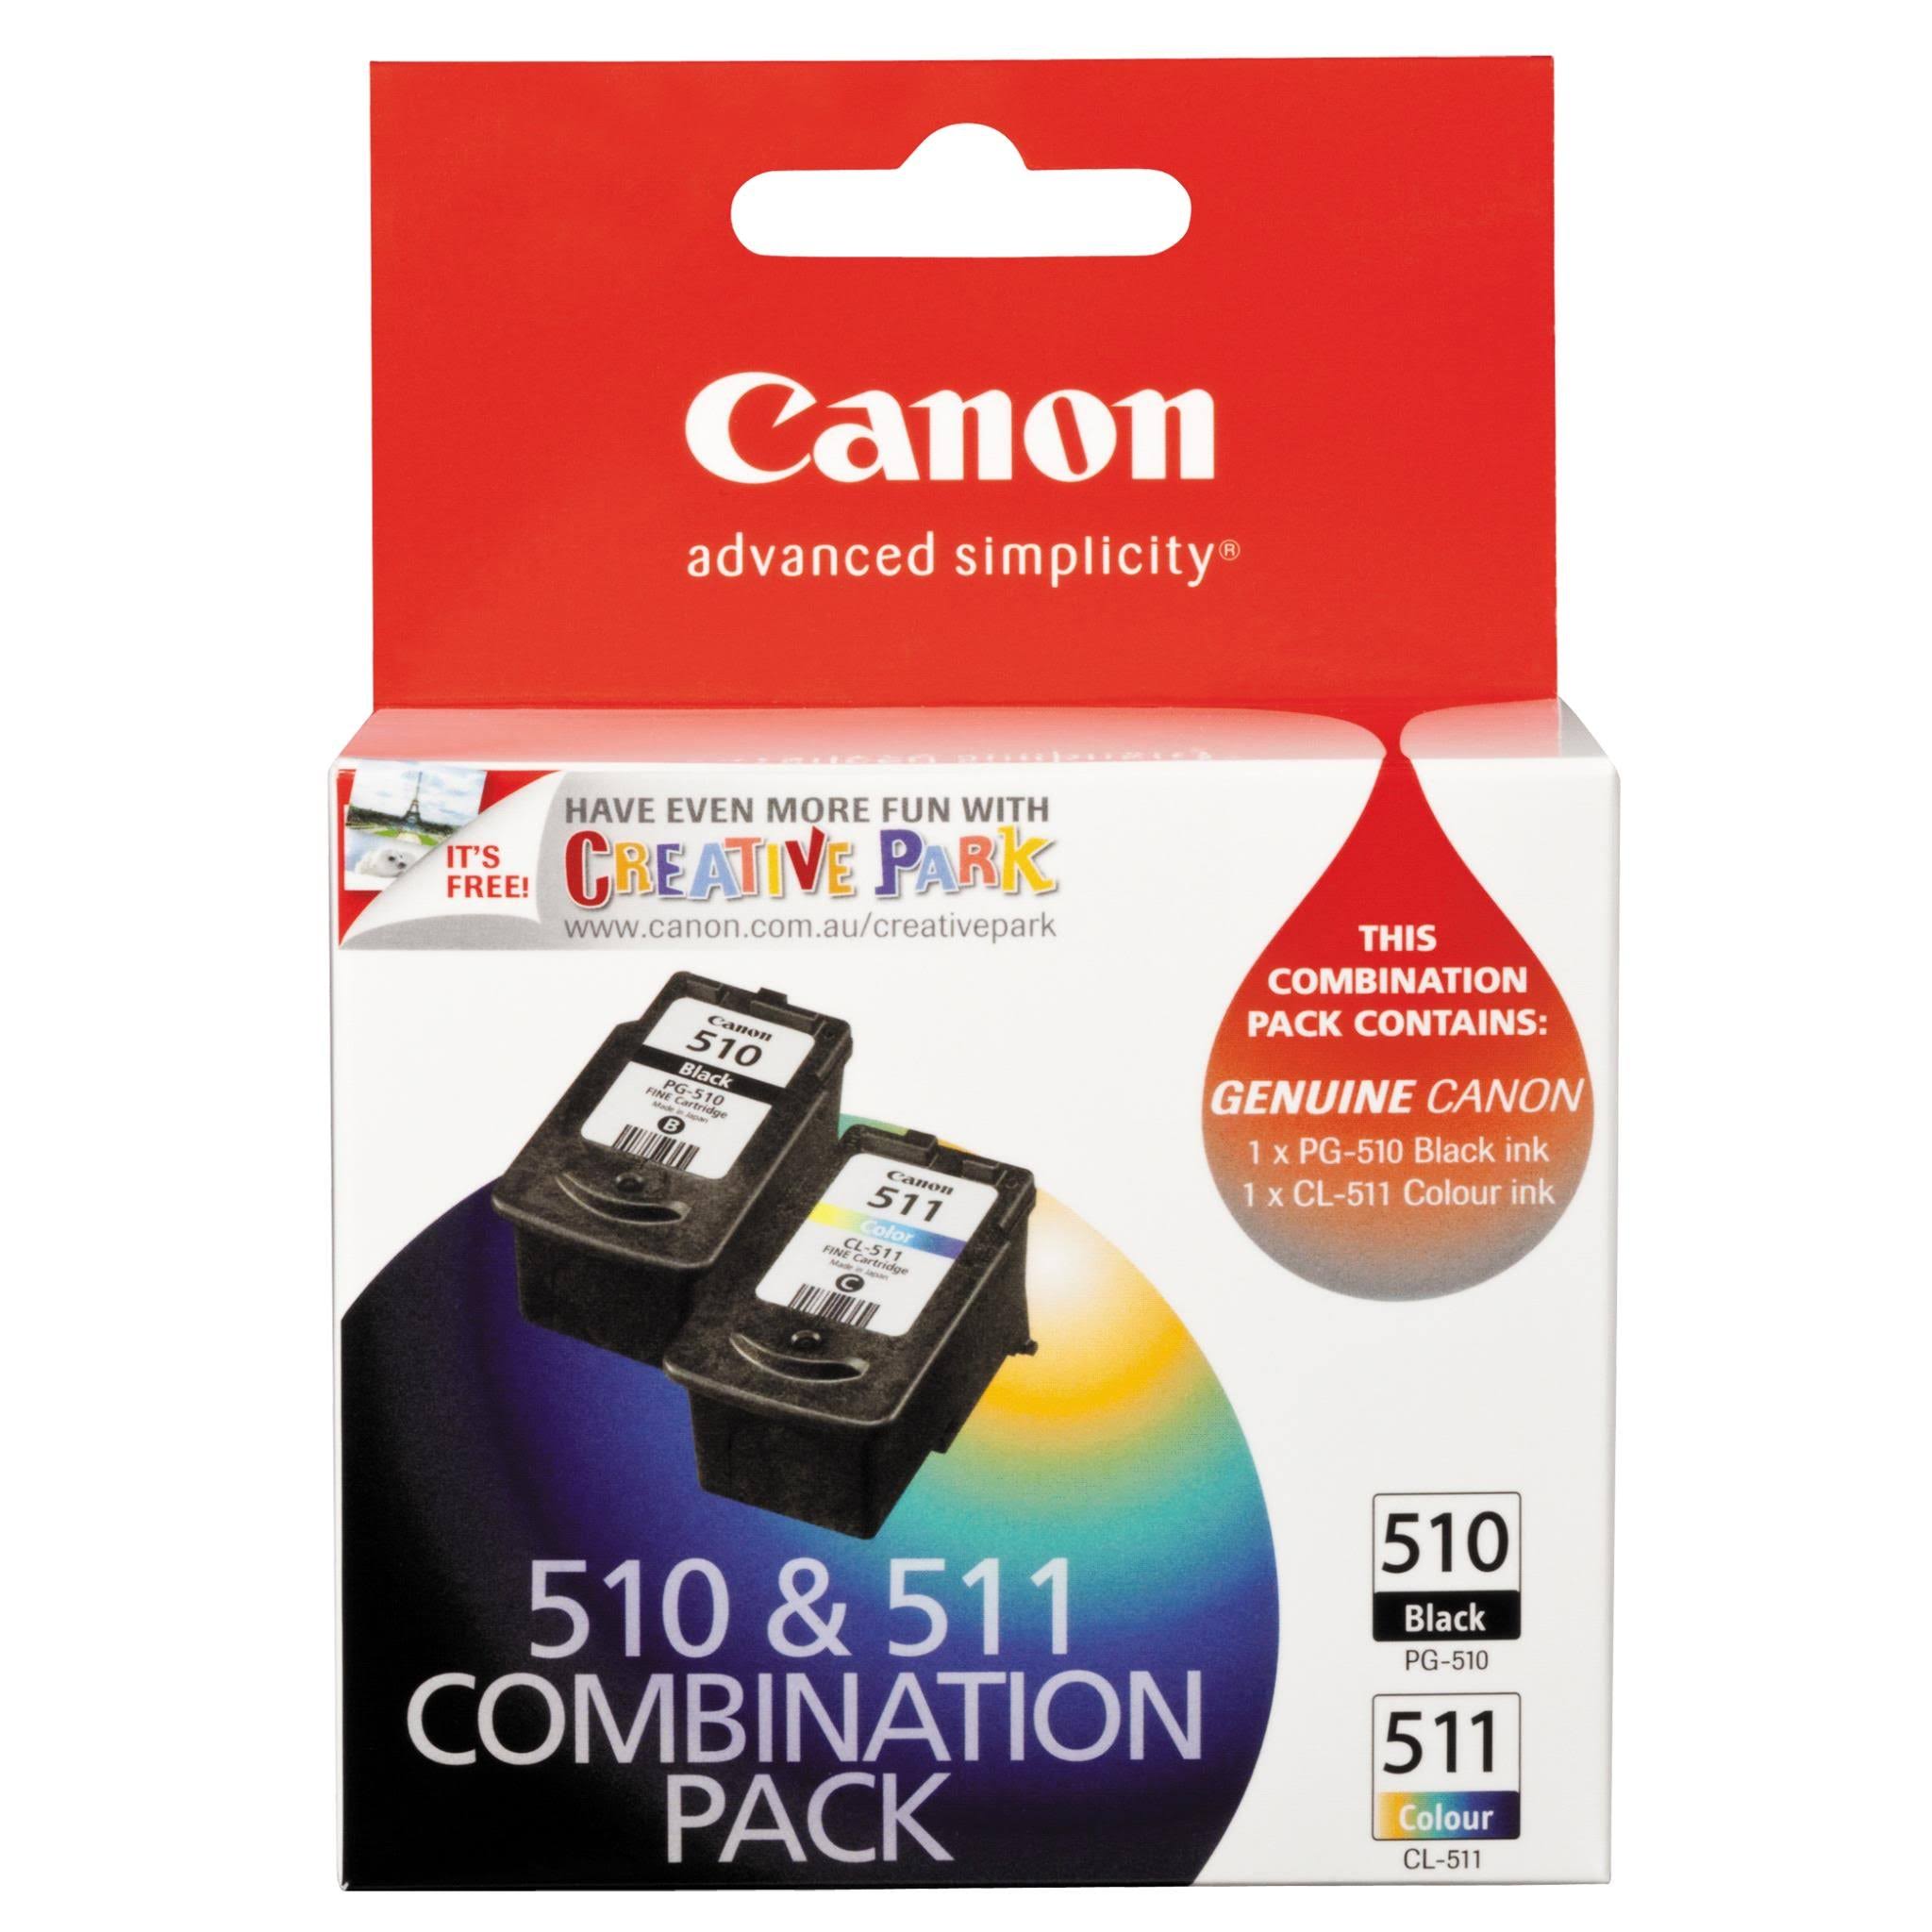 PG-510 / CL-511 Canon Combination Pack